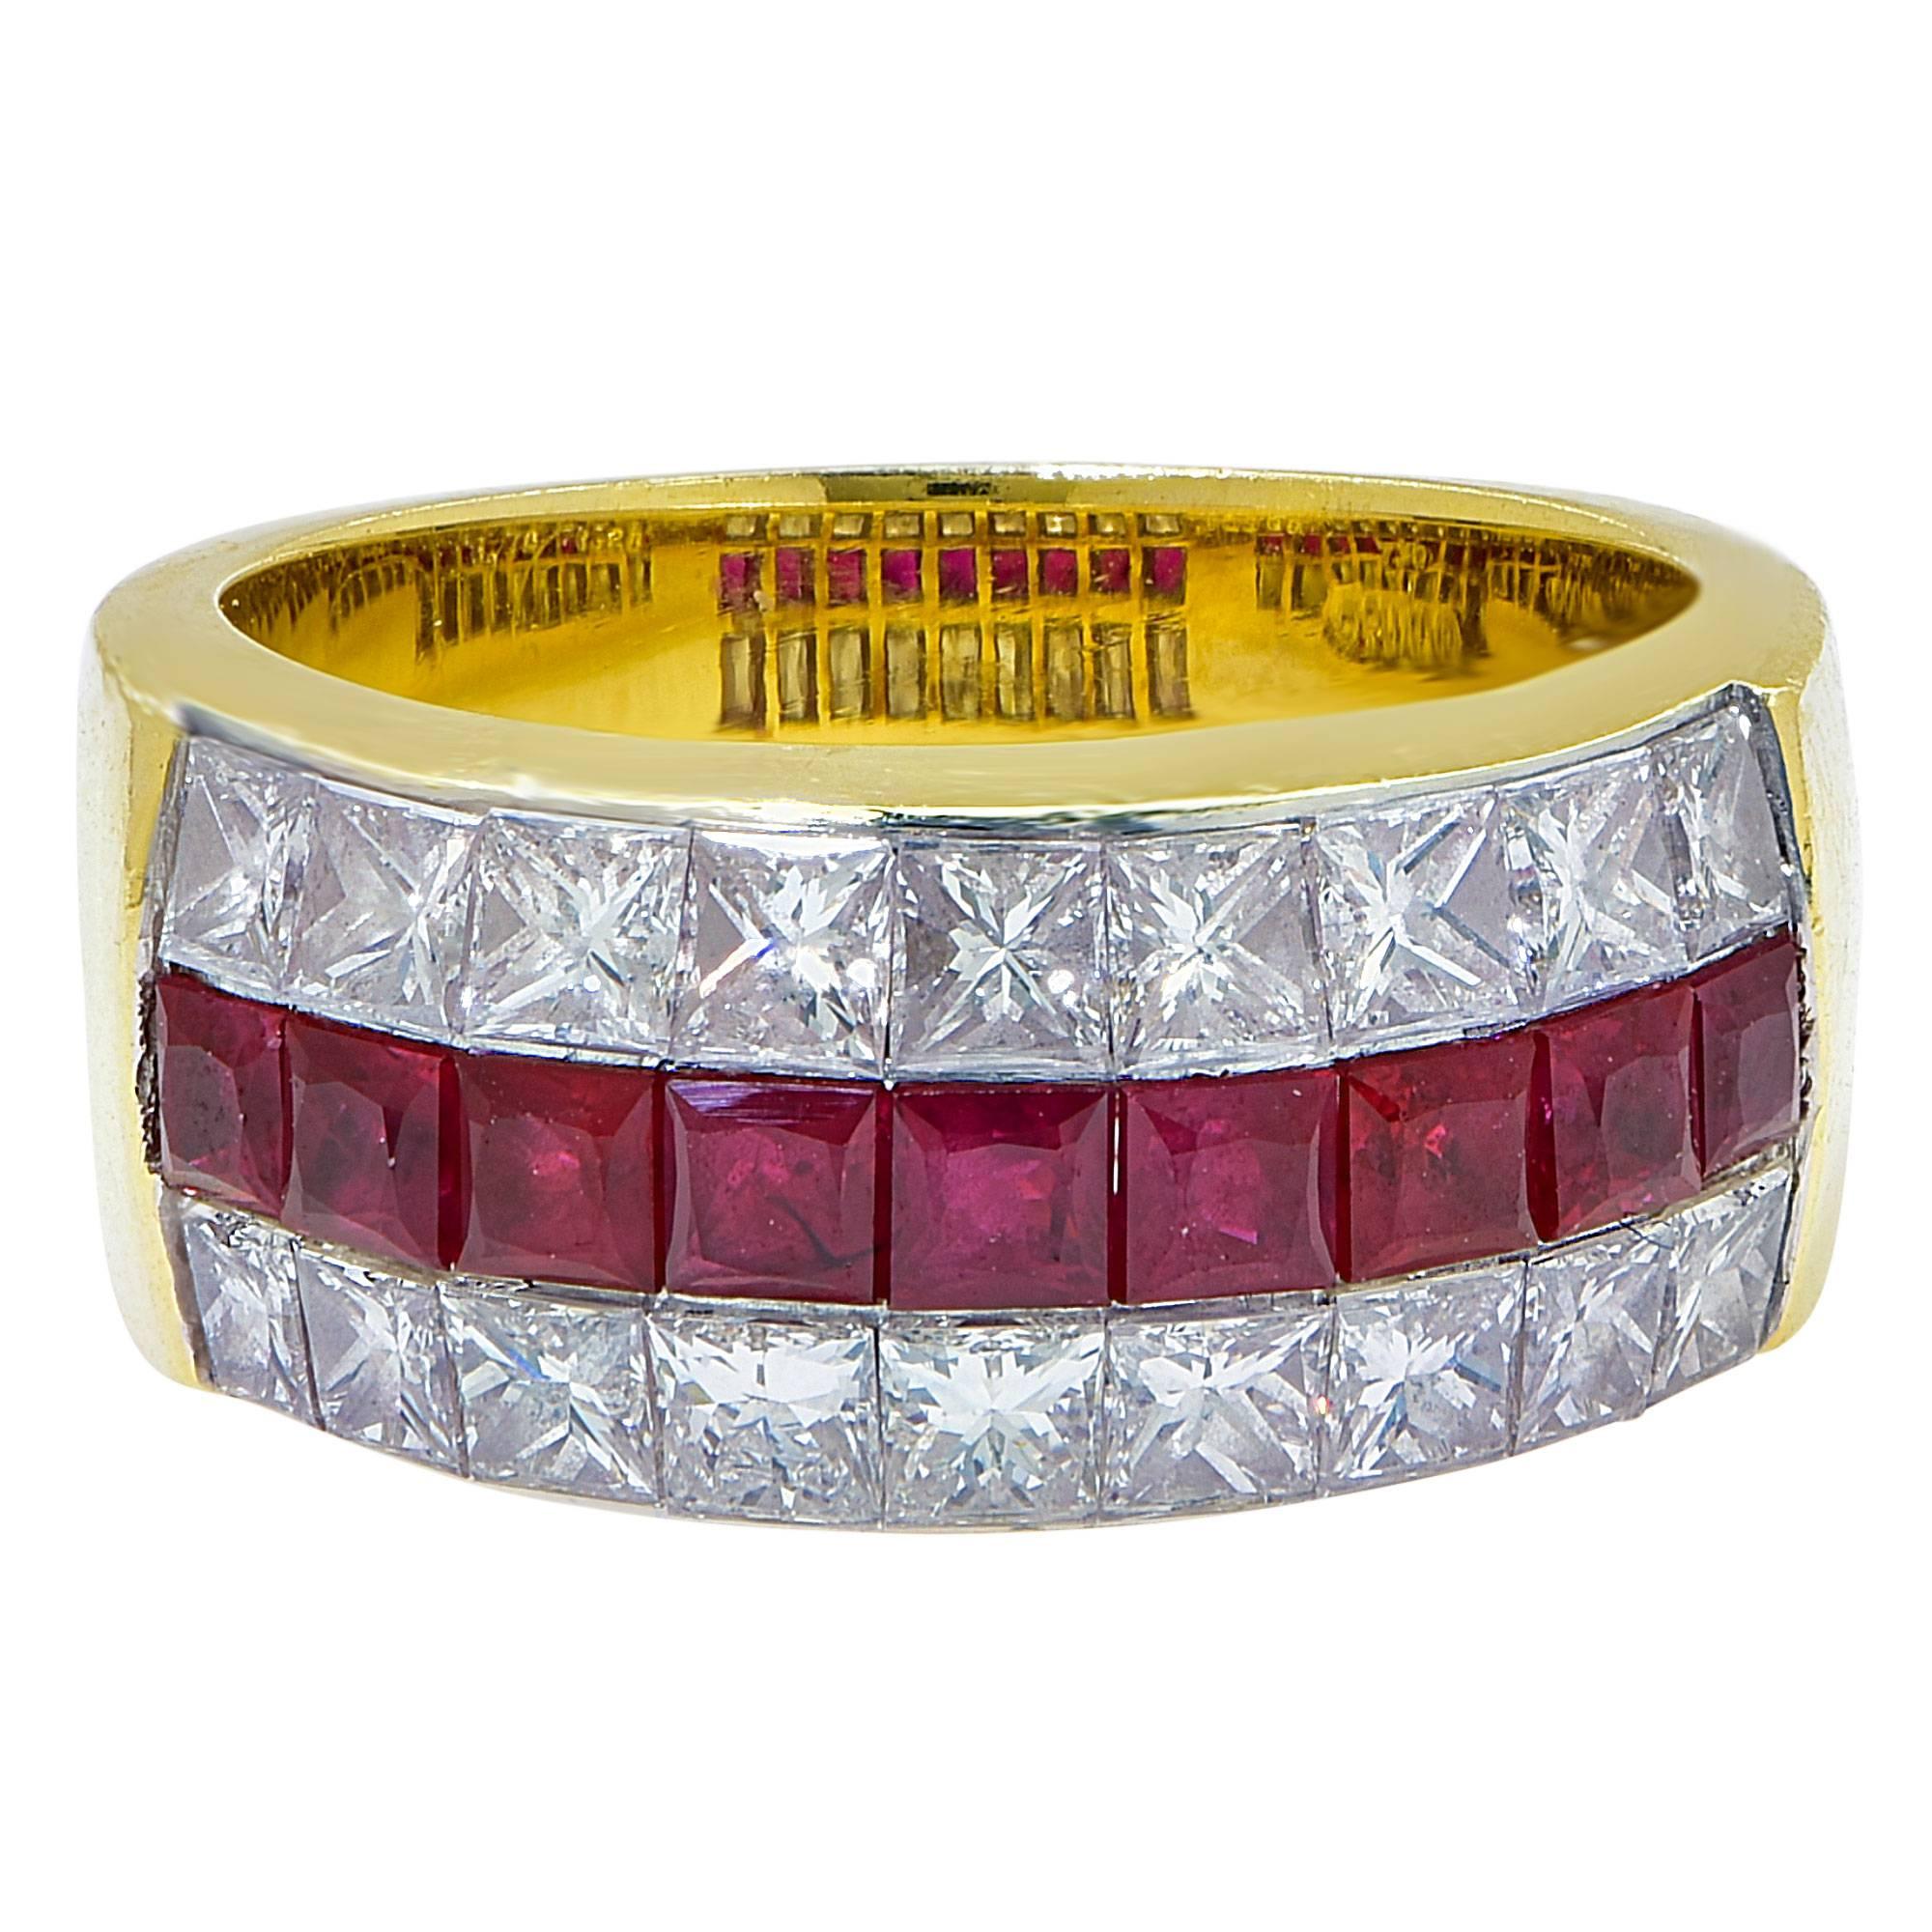 18k yellow gold ring featuring 9 square cut Burma rubies weighing 1.28cts total, accented by 18 princess cut diamonds weighing 1.76cts total, F color VS clarity.

Ring size: 6.25 (can be sized up or down)
Metal weight: 11.19 grams

This ruby